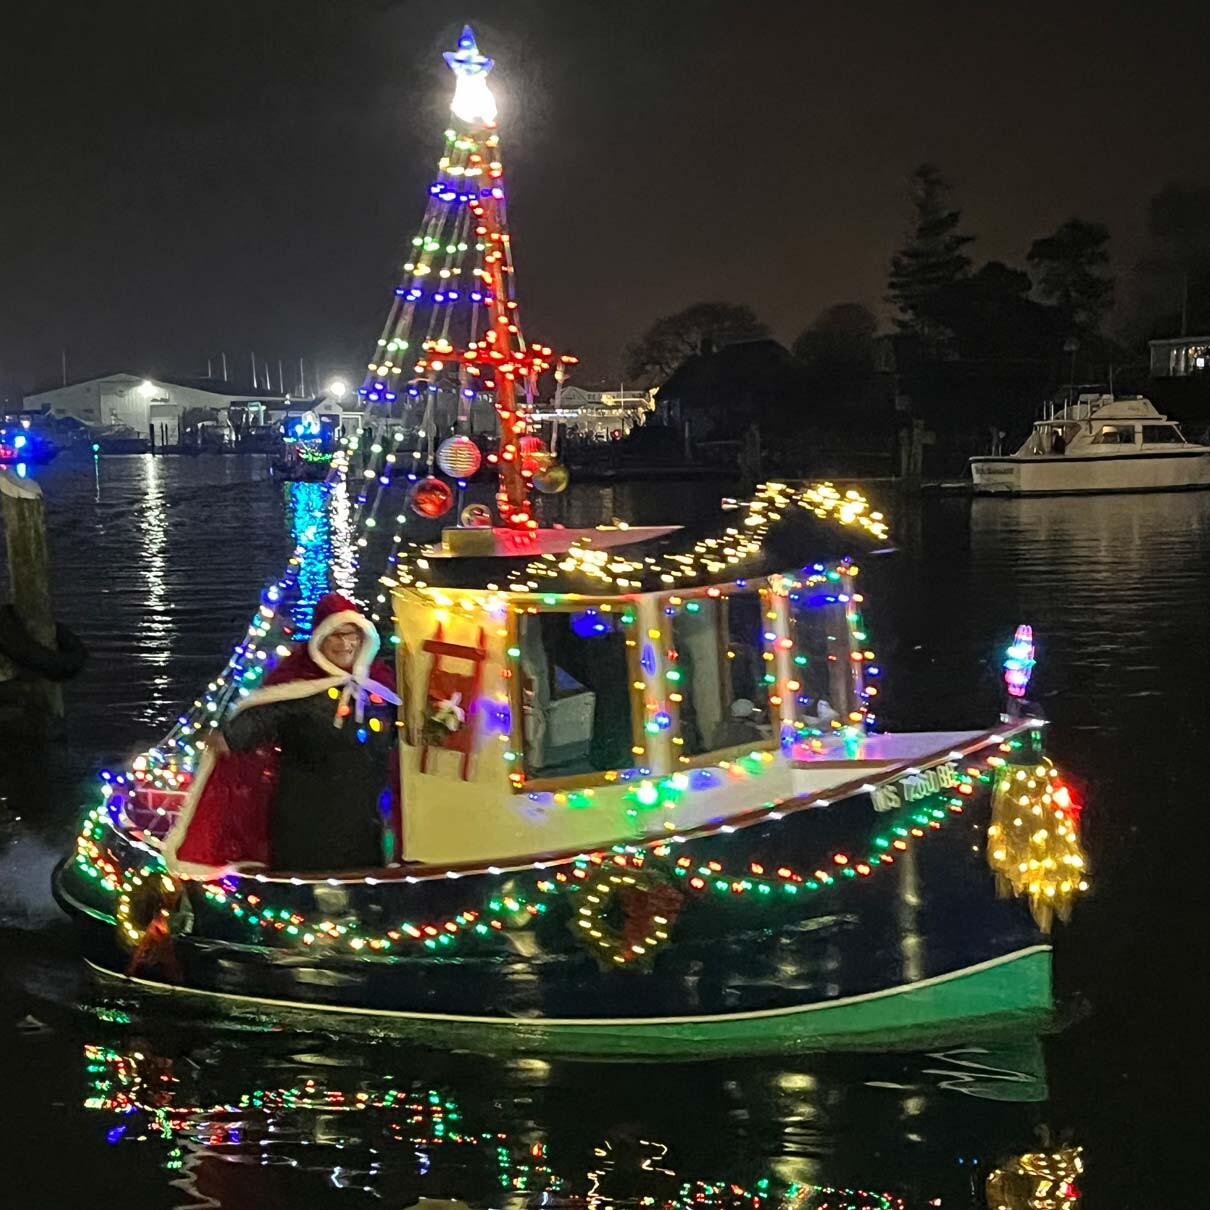 Tug boat in hyannic Christmas parade with Christmas lights